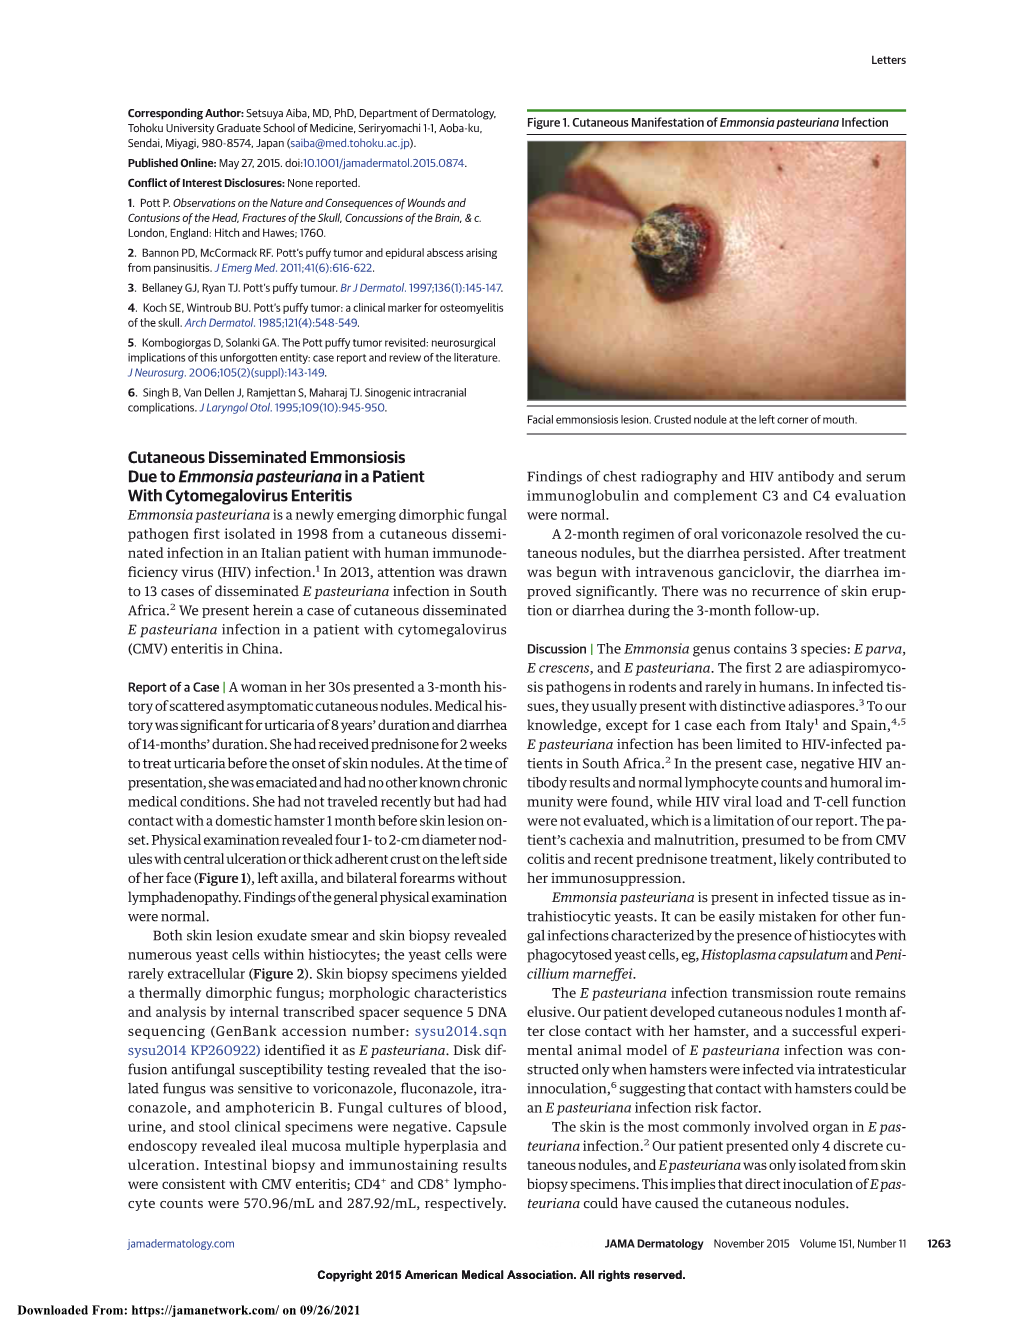 Cutaneous Disseminated Emmonsiosis Due to Emmonsia